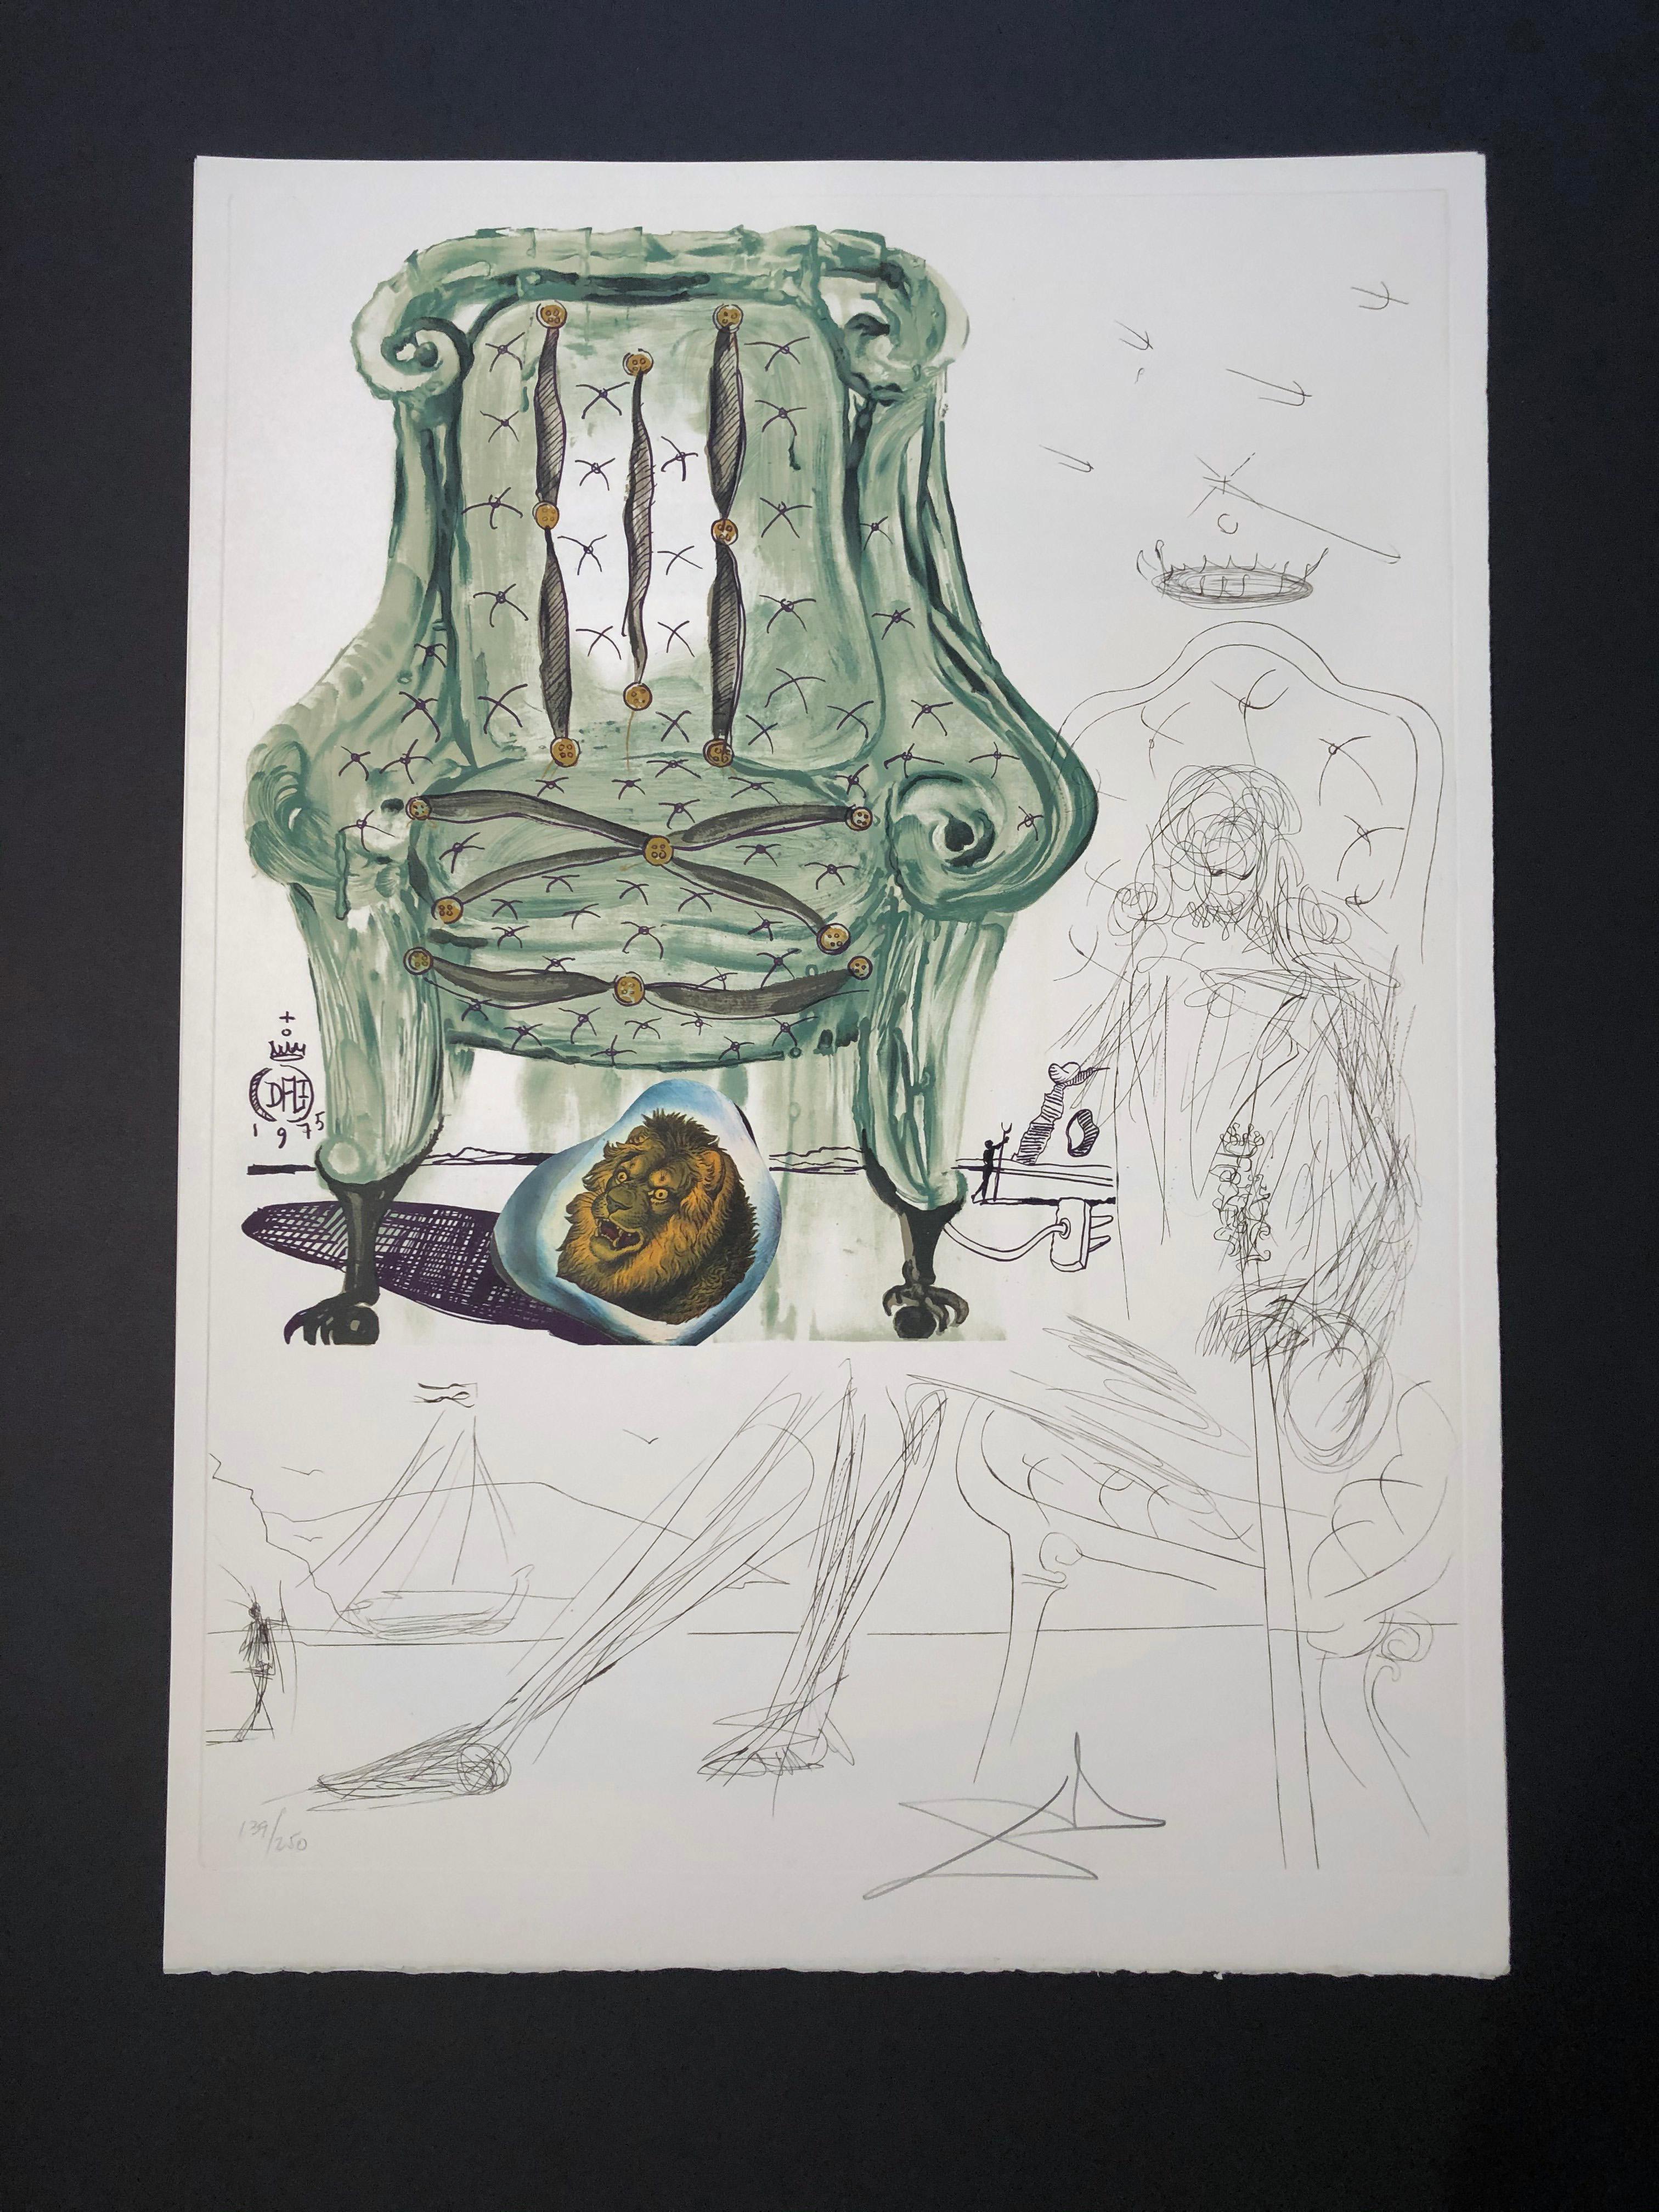 Breathing Pneumatic Armchair - Print by Salvador Dalí